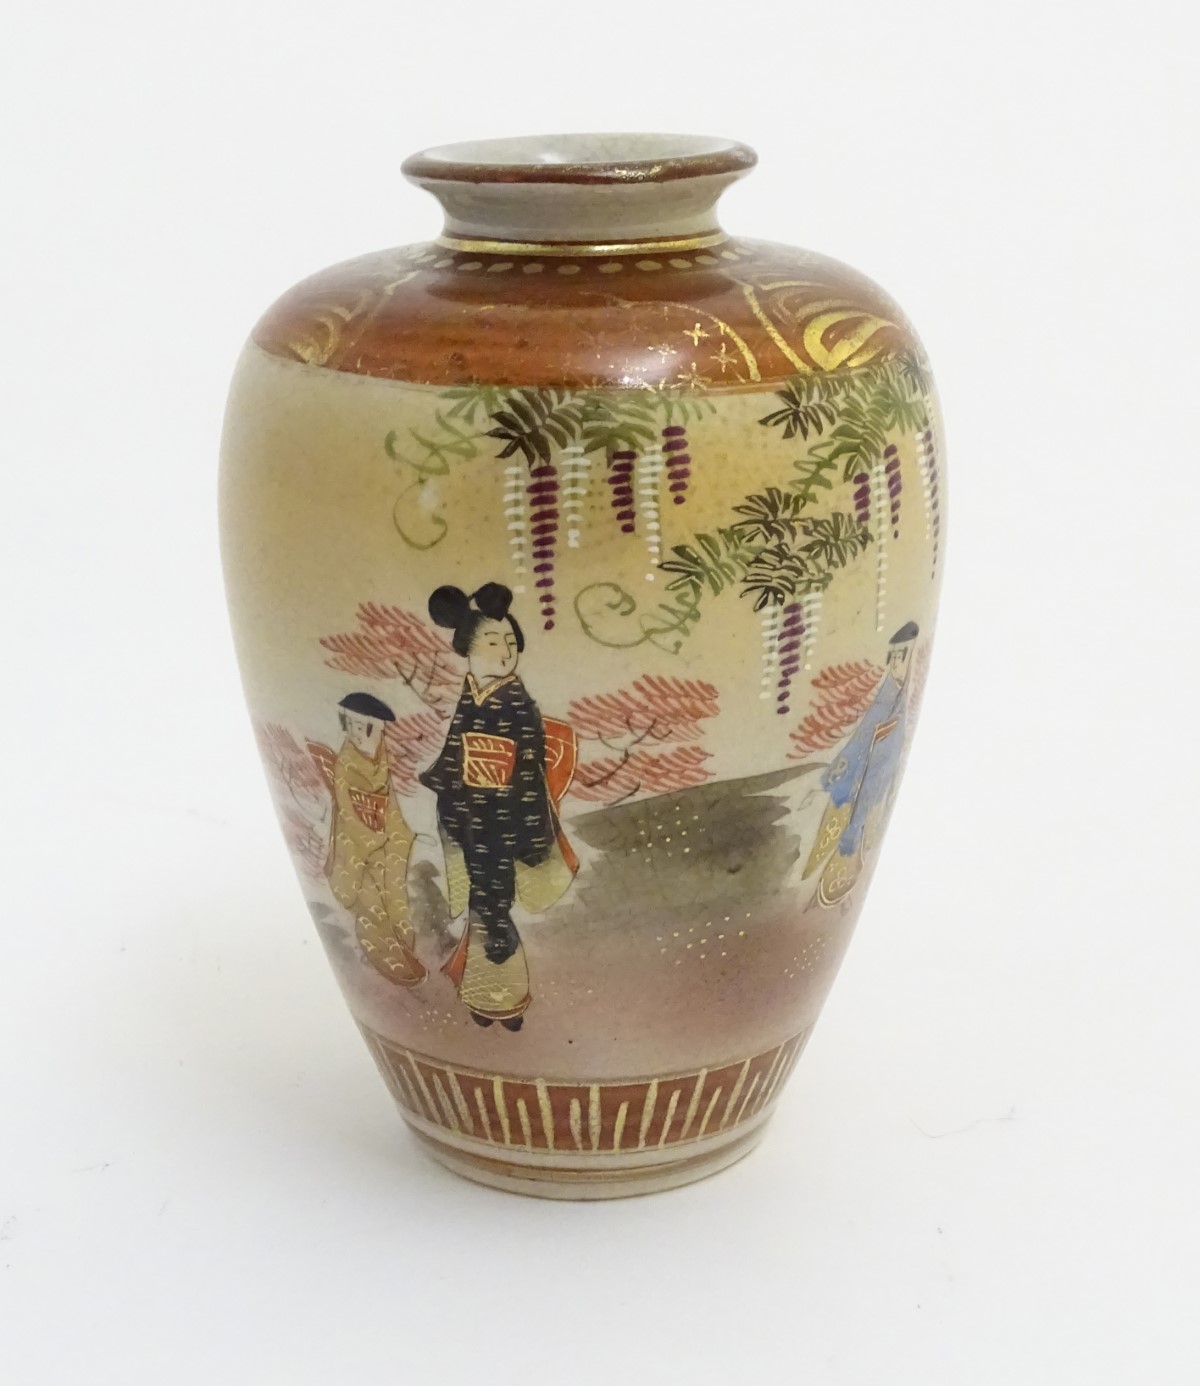 A small Japanese satsuma vase depicting figures in a garden, with gilt highlights. - Image 7 of 8